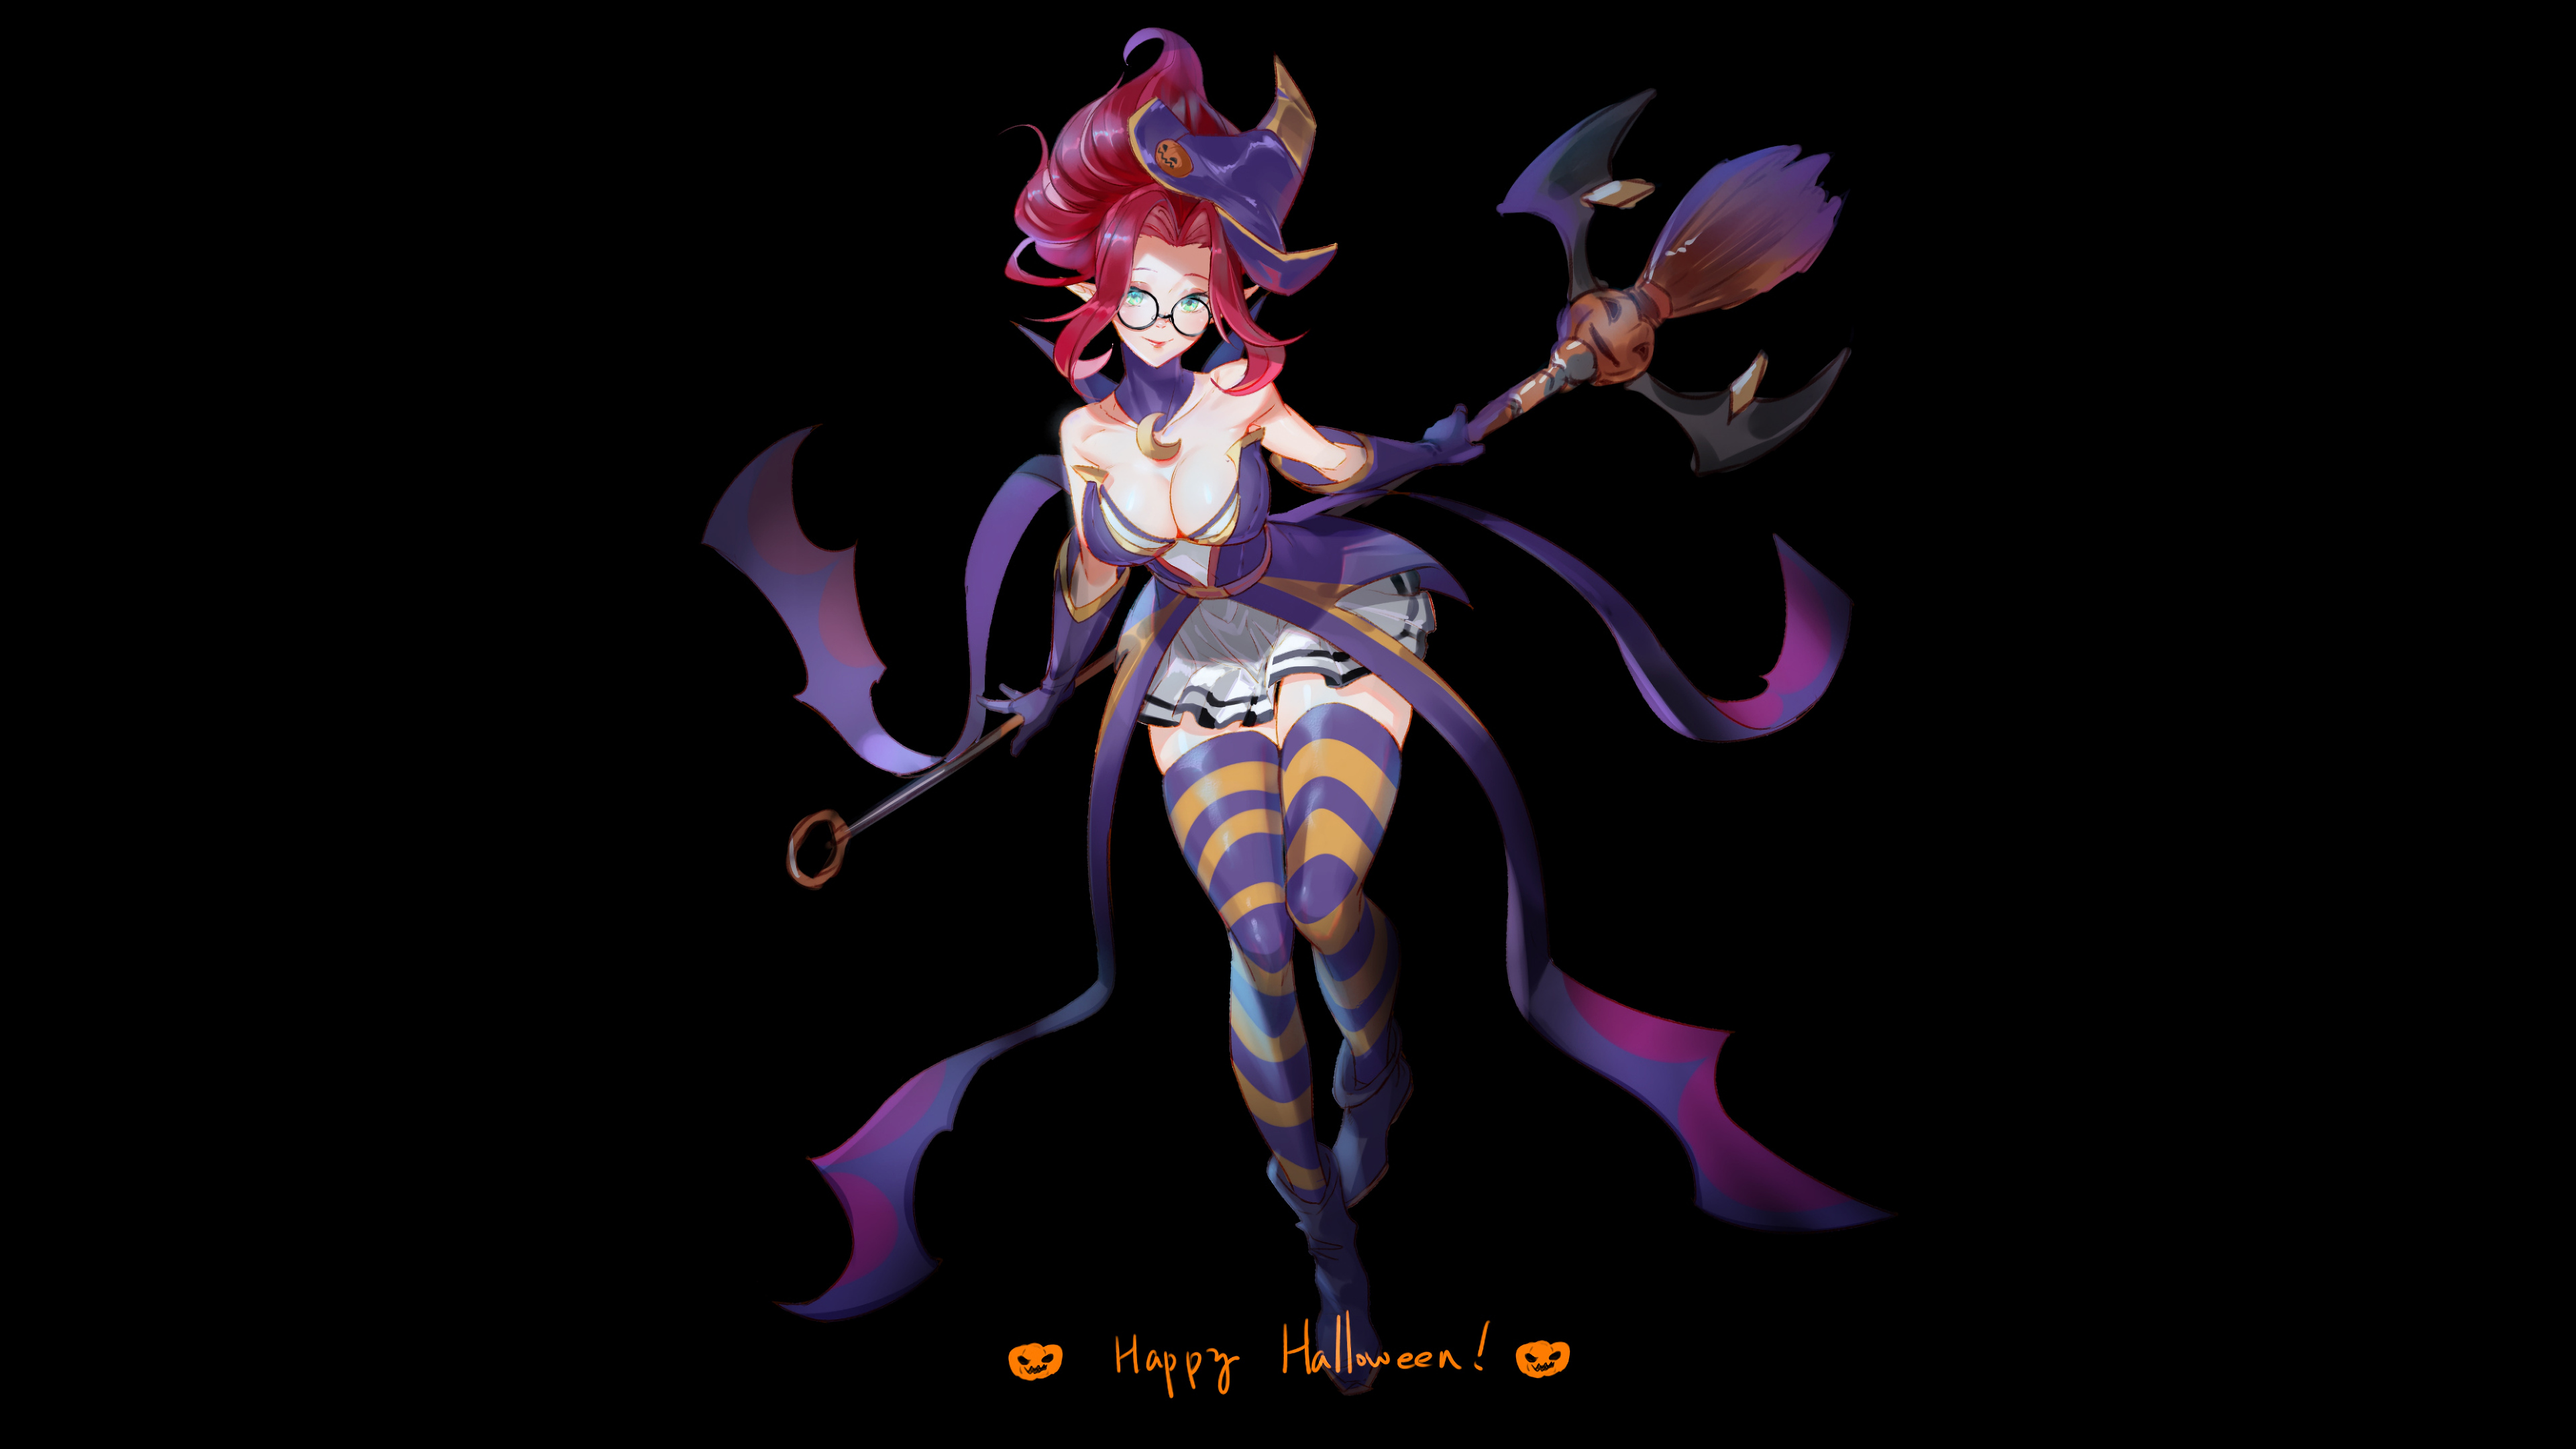 bewitching janna happy halloween league of legends lol lol 1574104647 - Bewitching Janna Happy Halloween League of Legends LoL lol - Tales from the Rift - League of Legends, league of legends, Janna